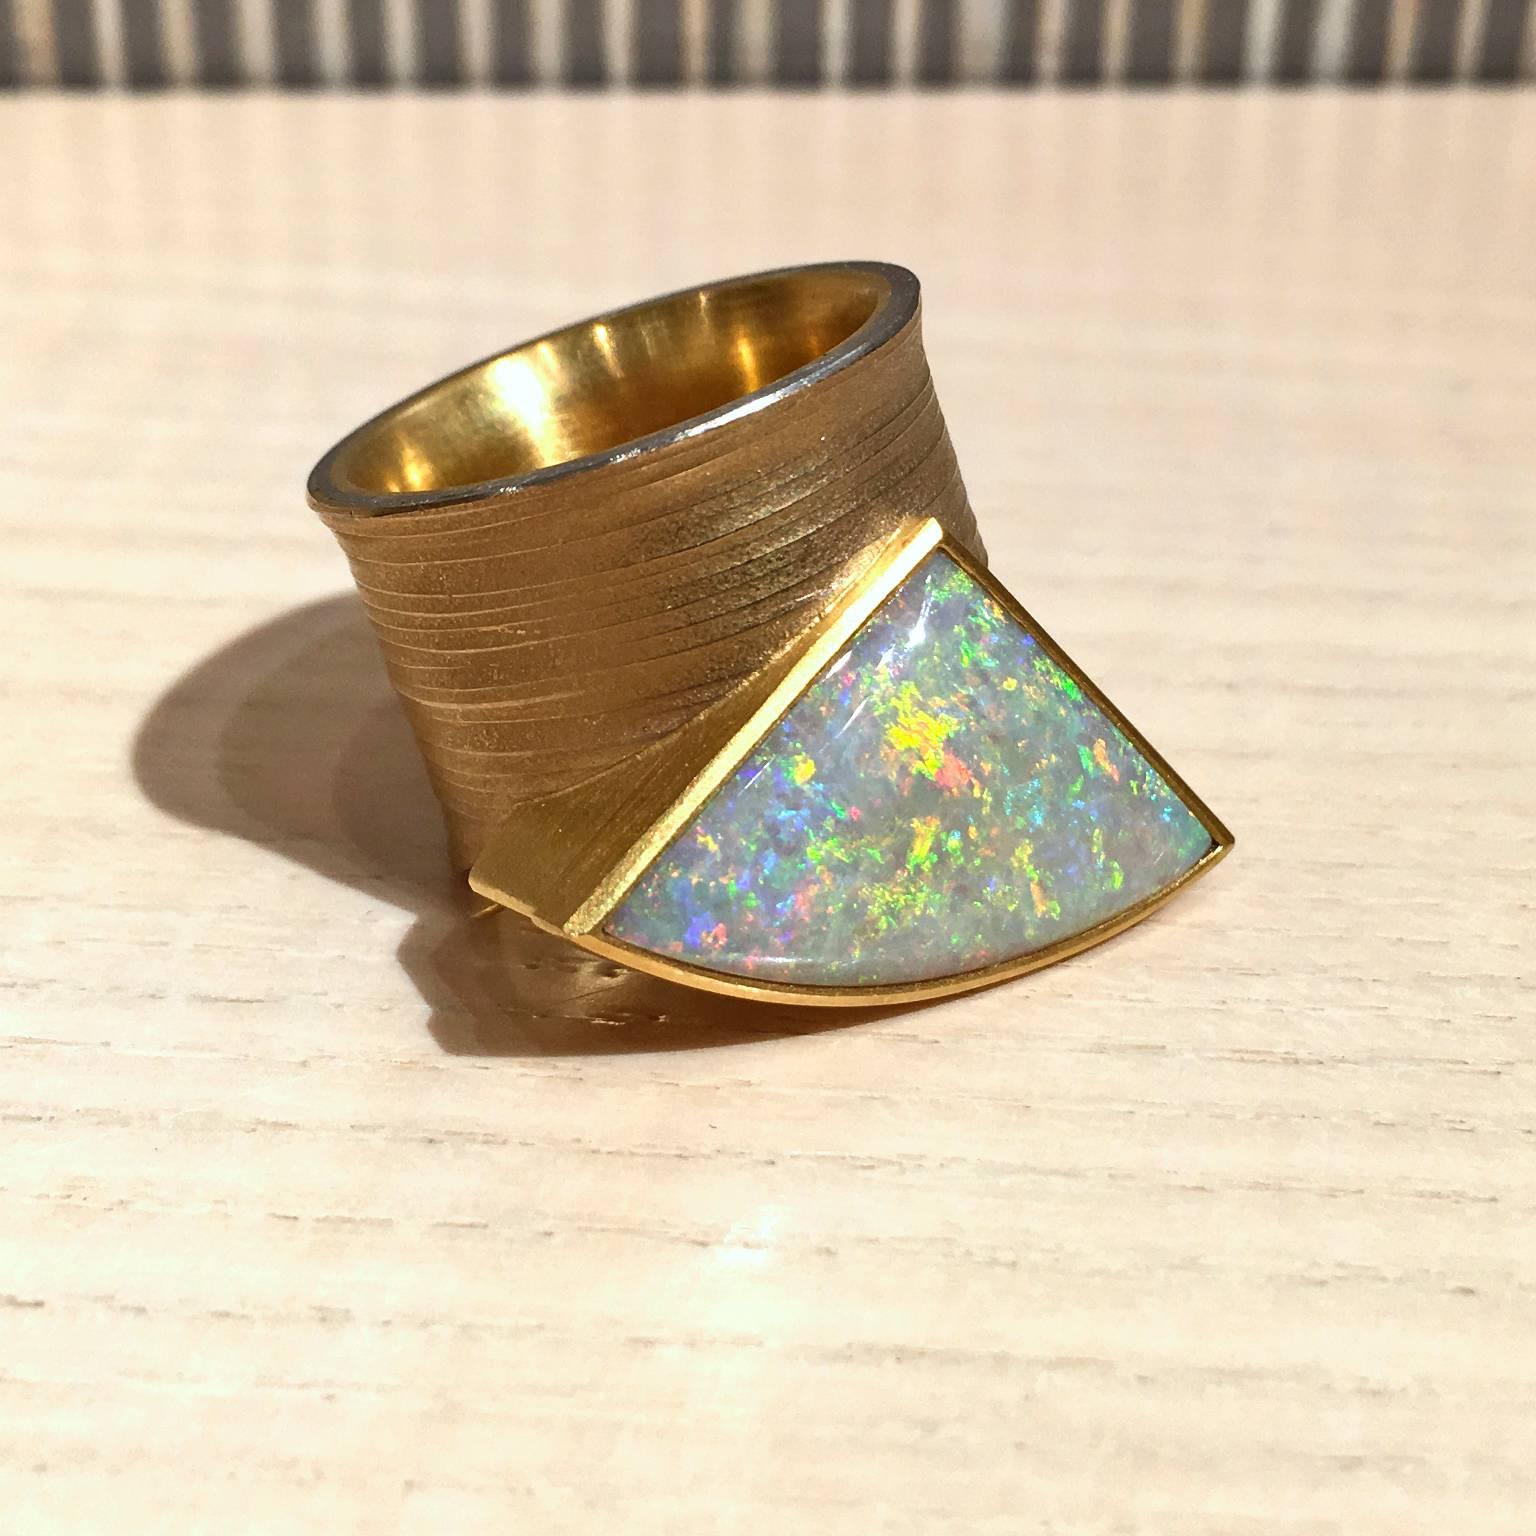 One-of-a-Kind ring handcrafted in 21k yellow gold and platinum with a gorgeous custom cut and polished 9.55 carat opal exhibiting a flashfire and pinfire pattern showcasing primarily orange, red, and green flash with strong accents of violet, blue,